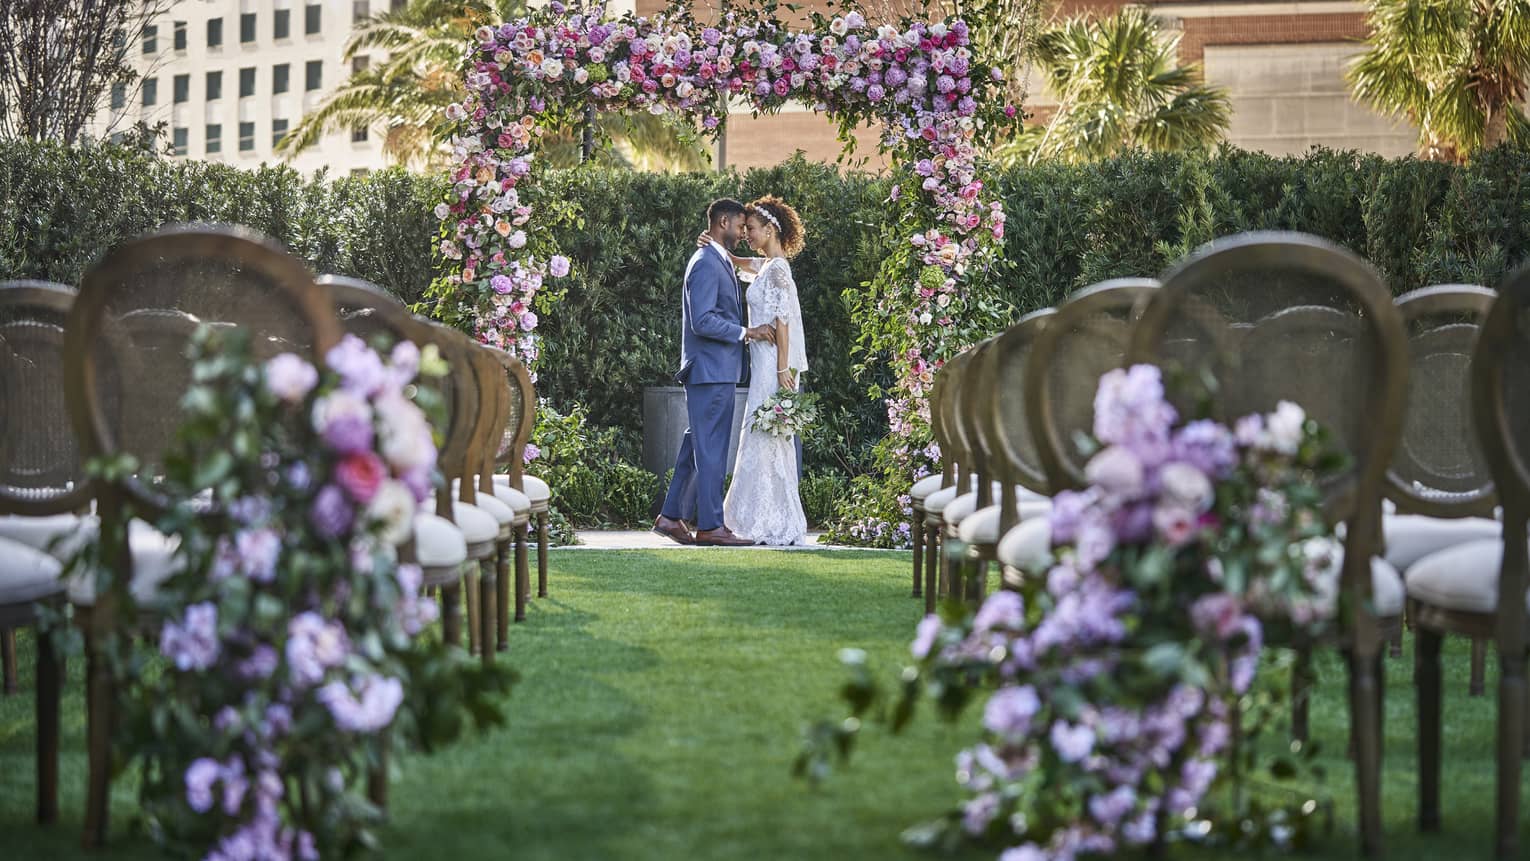 A bride and groom under an arch of flowers with chairs lined up in rows.